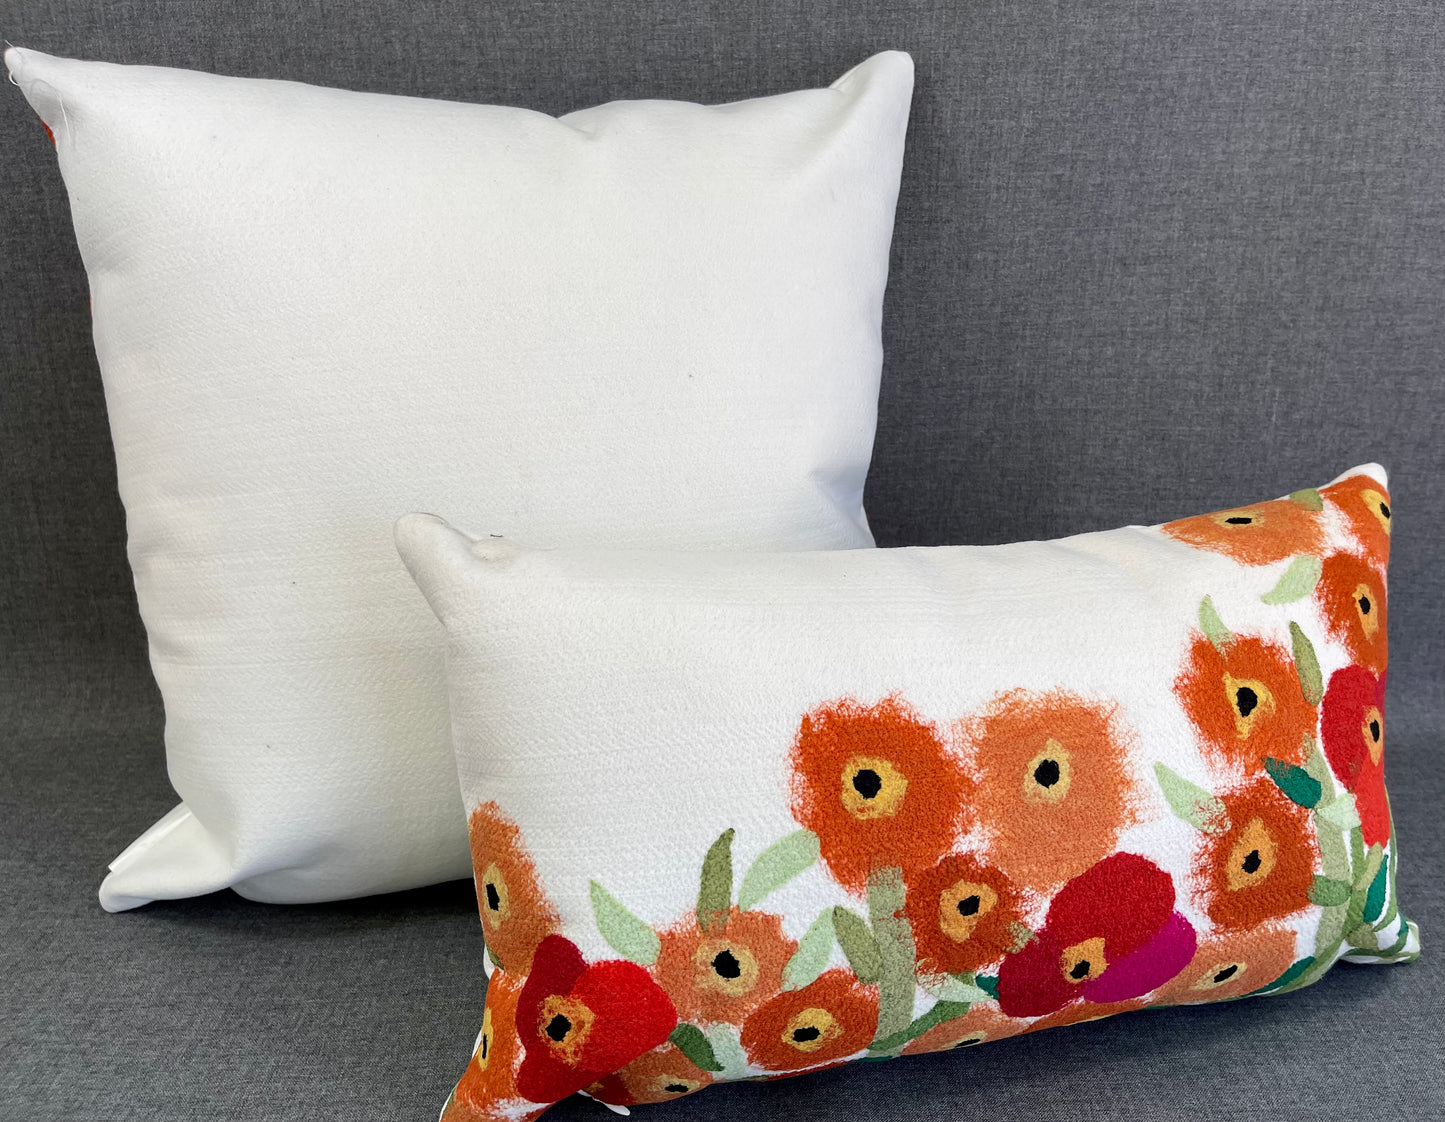 Luxury Outdoor Pillow - 18" x 18" - California Poppy; Cute flowers of red and orange on a white background, surrounded by green leaves